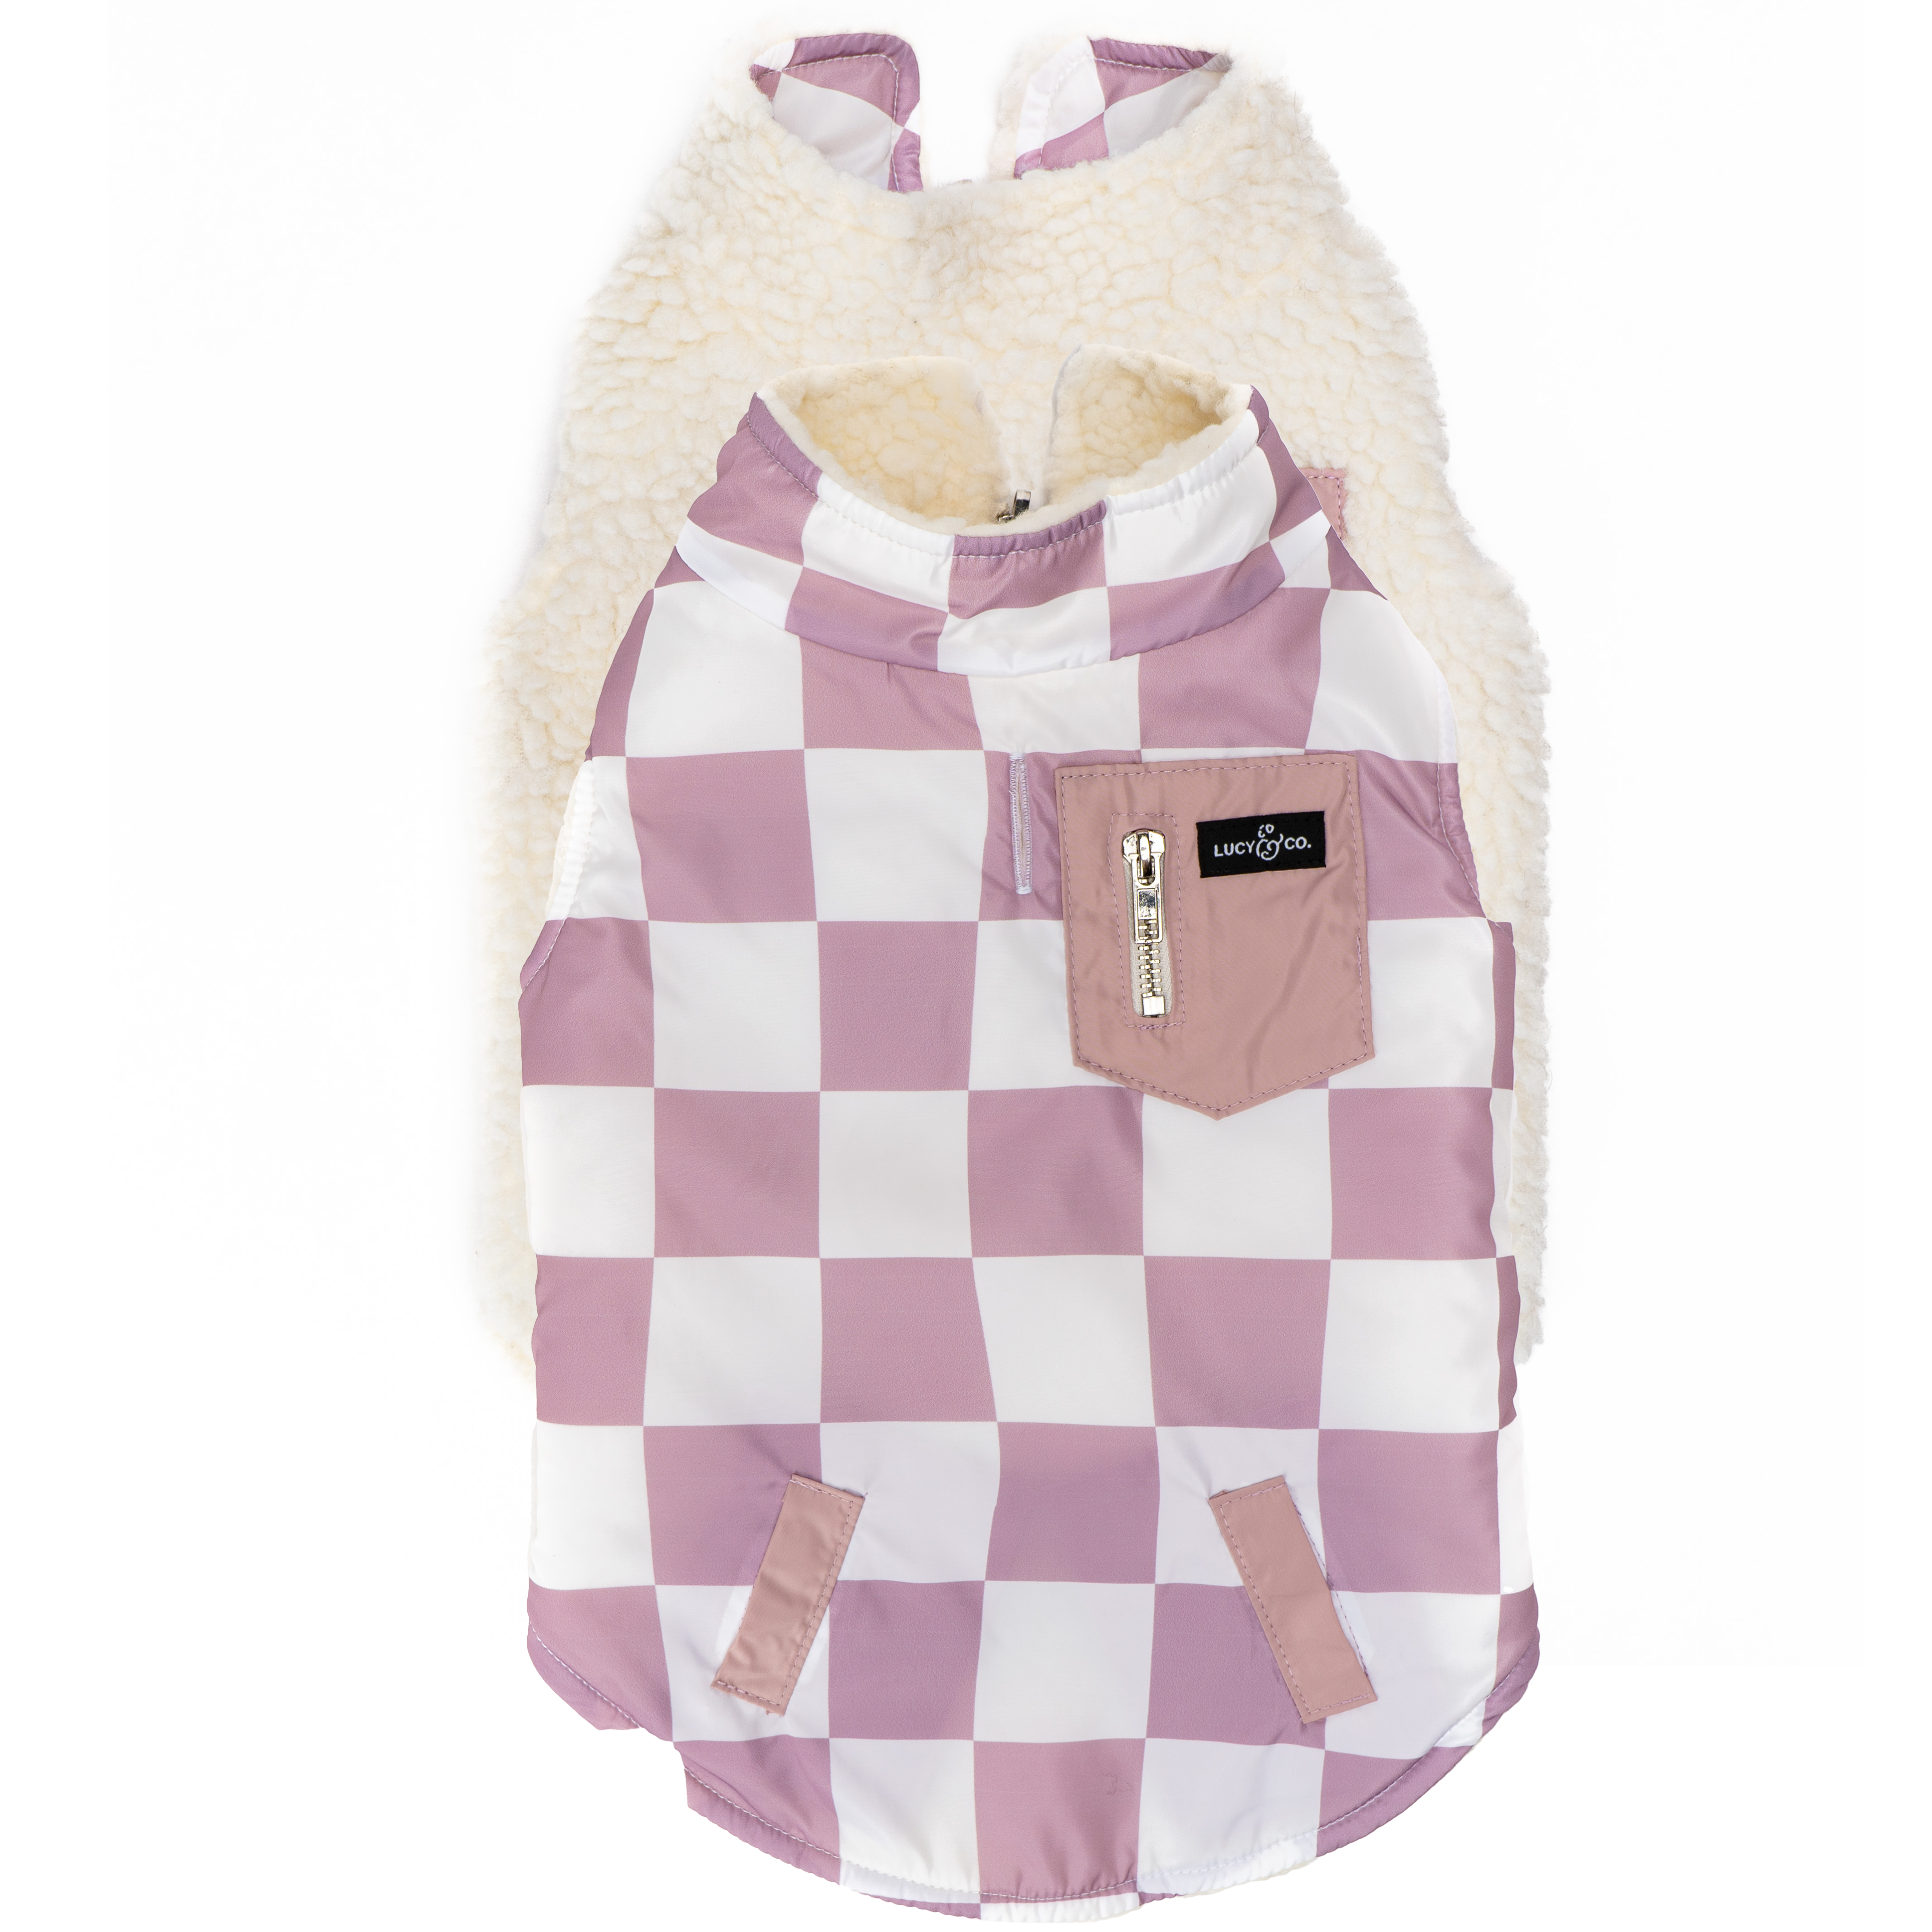 The Checked Out Reversible Teddy Vest: Small